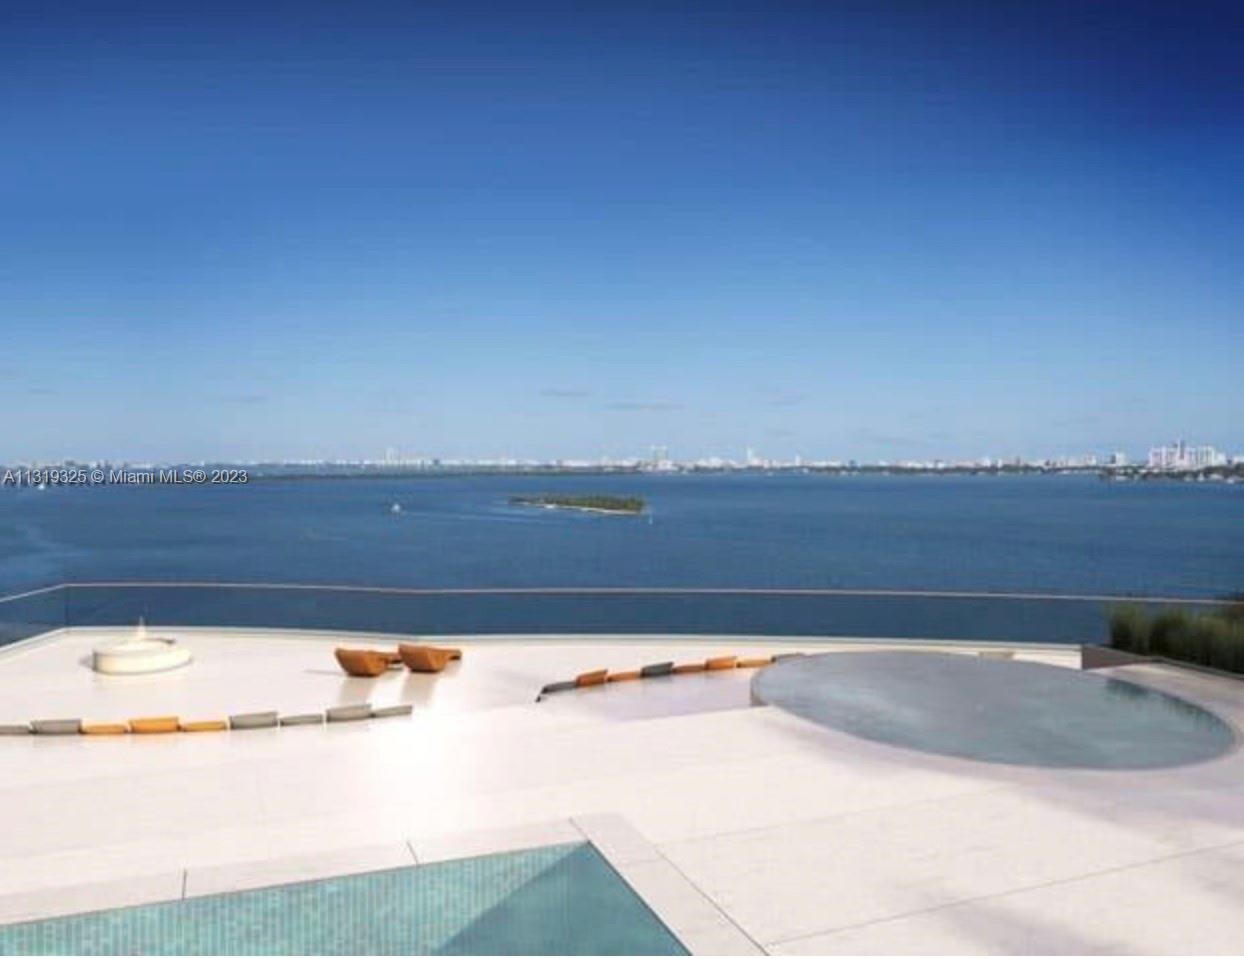 Photo 1 of Aria on the Bay Aria Apt 204 in Miami - MLS A11319325